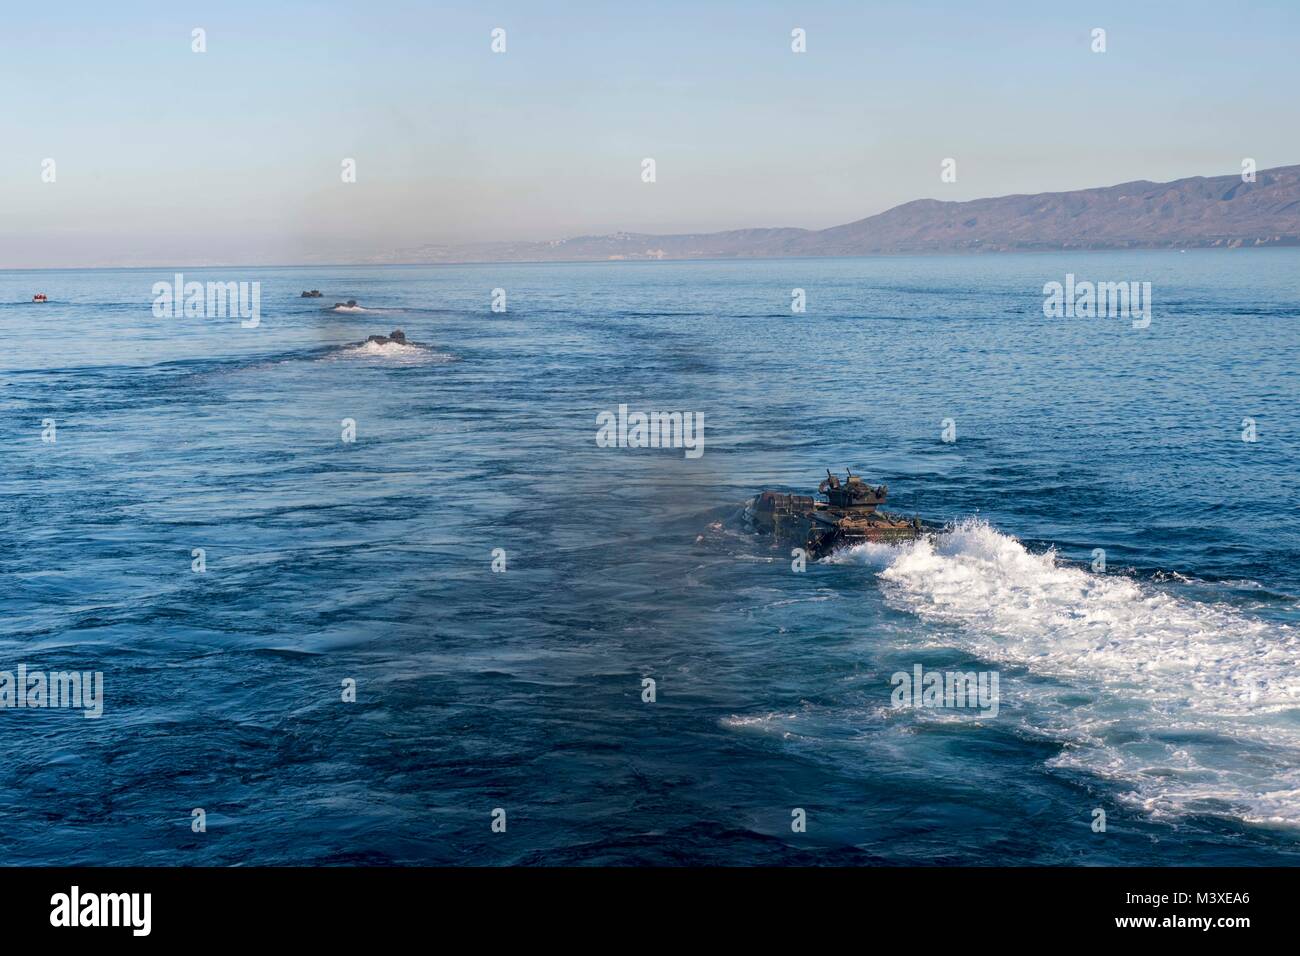 180203-N-GR847-067  PACIFIC OCEAN (Feb. 3, 2018) Assault Amphibious Vehicles (AAV) depart from the Whidbey Island-class dock landing ship USS Rushmore (LSD 47) during Iron Fist 2018. Rushmore is underway off the coast of Southern California in support of the amphibious portion of the exercise. Iron Fist is an annual, bilateral amphibious training exercise designed to improve the U.S. Marine Corps and the Japanese Ground Self-Defense Force’s ability to plan, communicate and conduct combined amphibious operations at the platoon, company and battalion levels. (U.S. Navy photo by Mass Communicatio Stock Photo